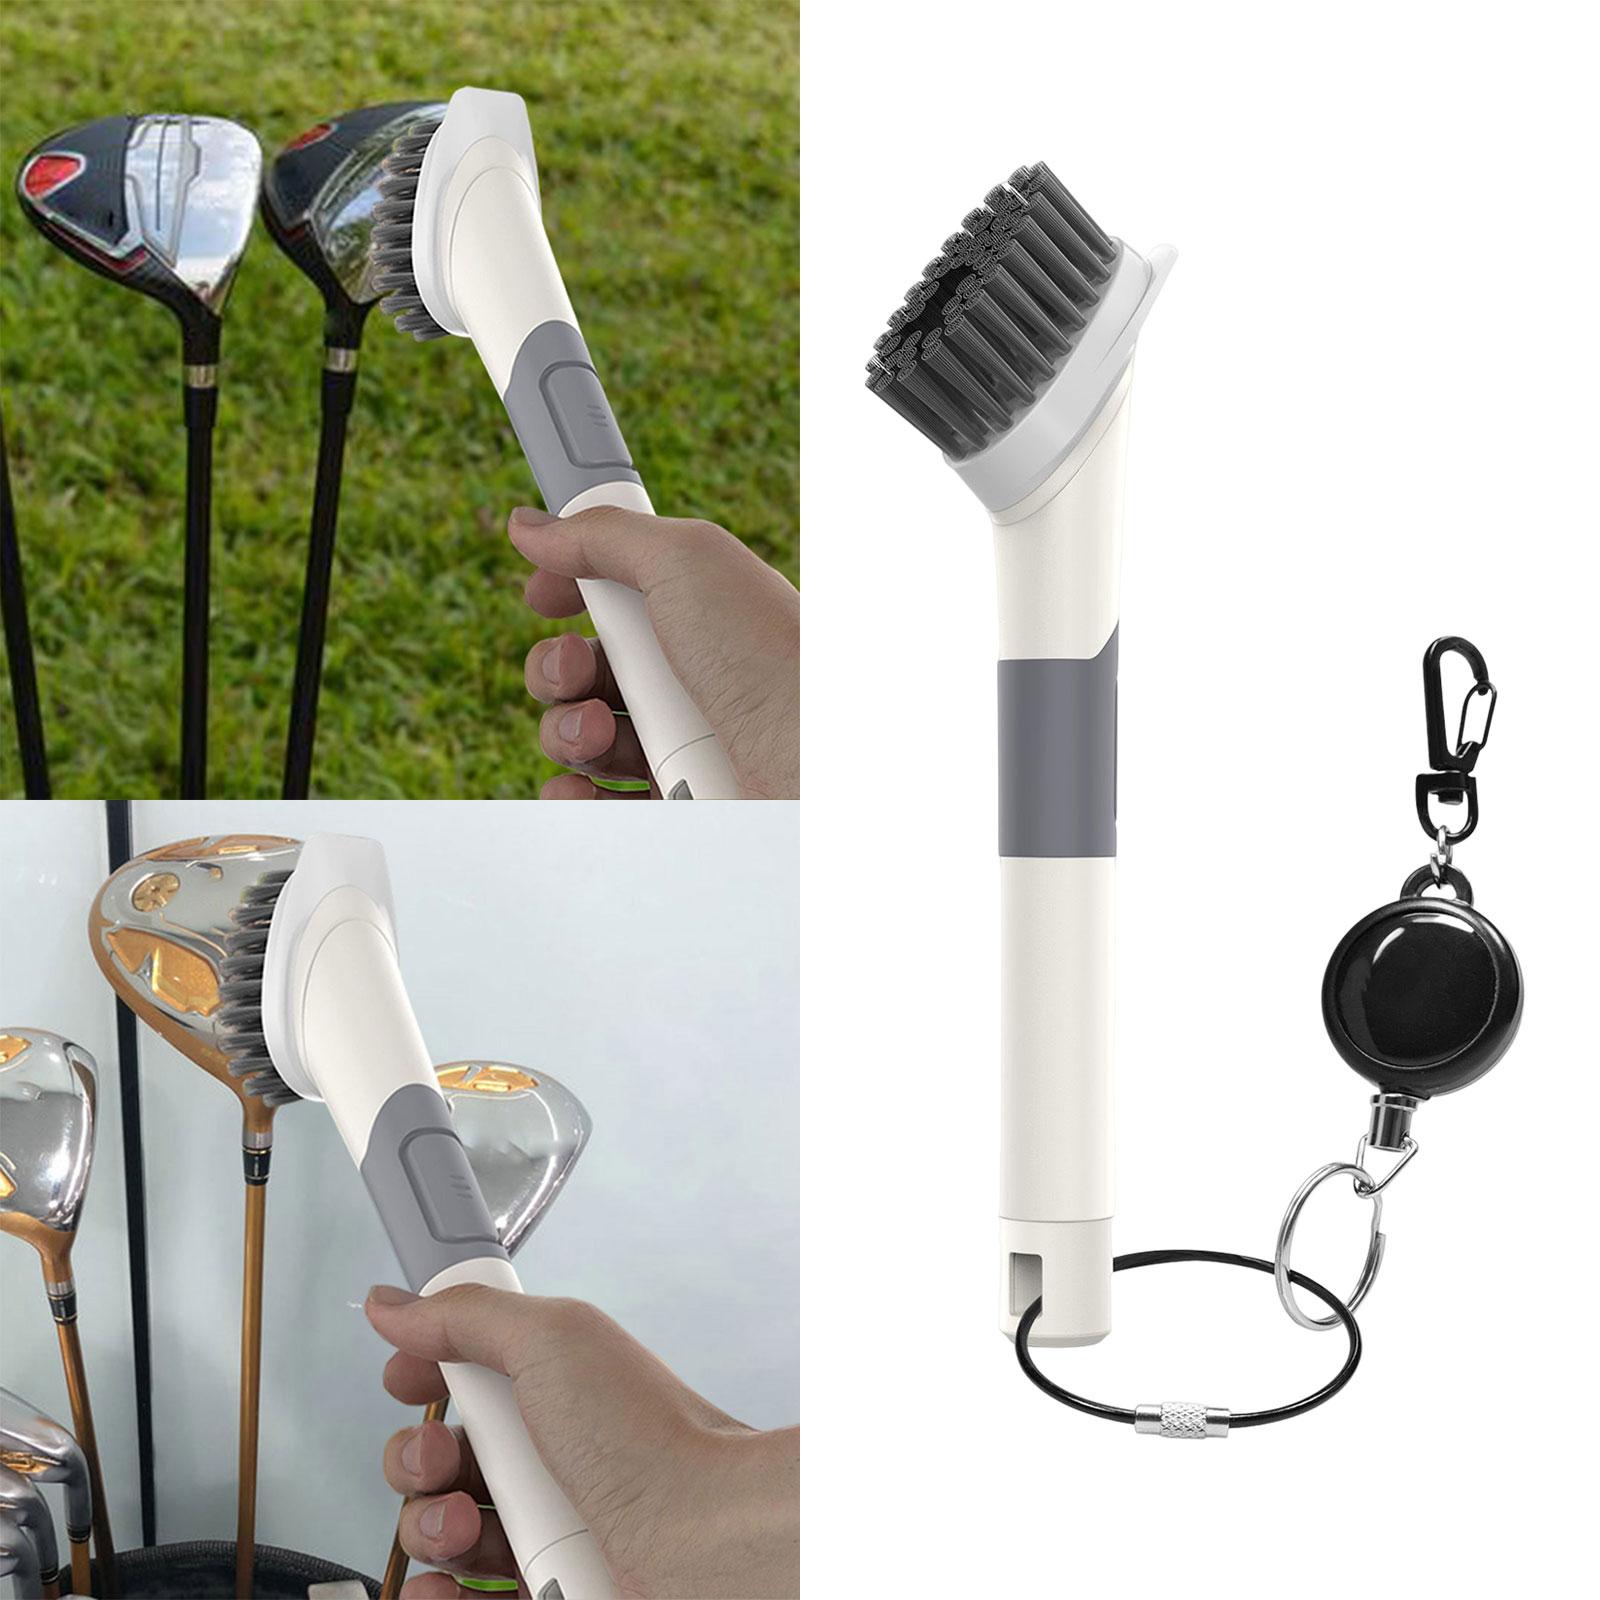 Golf Club Cleaner Cleaning Brush Golf Club Brush Portable for Men Golf Irons